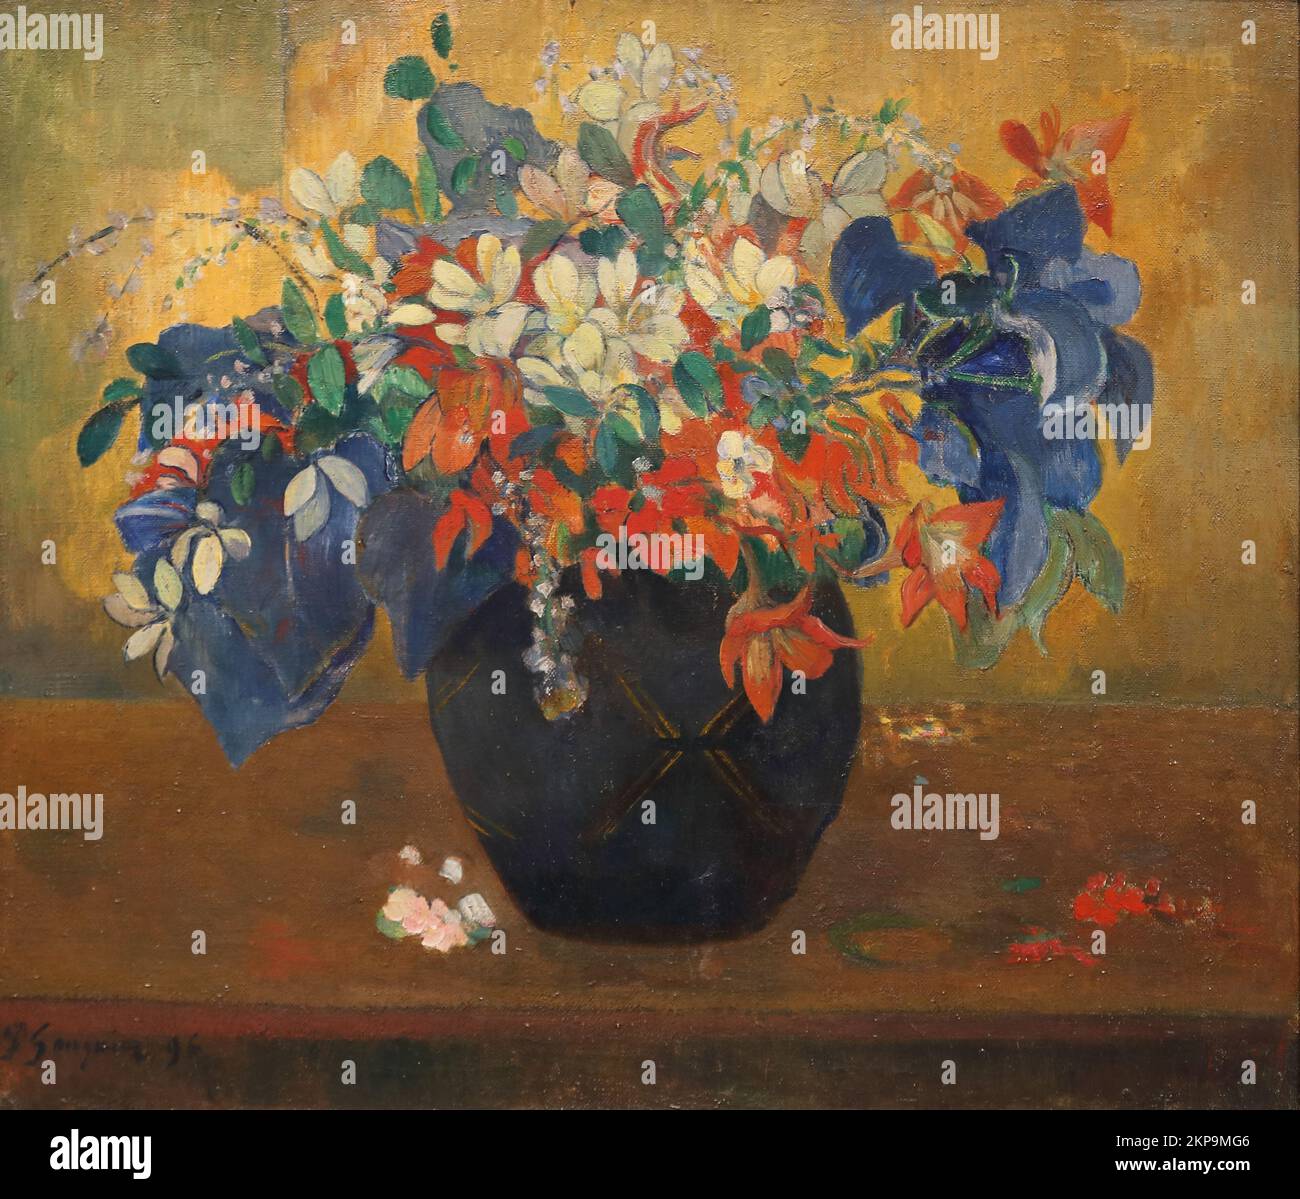 A Vase of Flowers by French post-impressionist painter Paul Gauguin at the National Gallery, London, UK Stock Photo